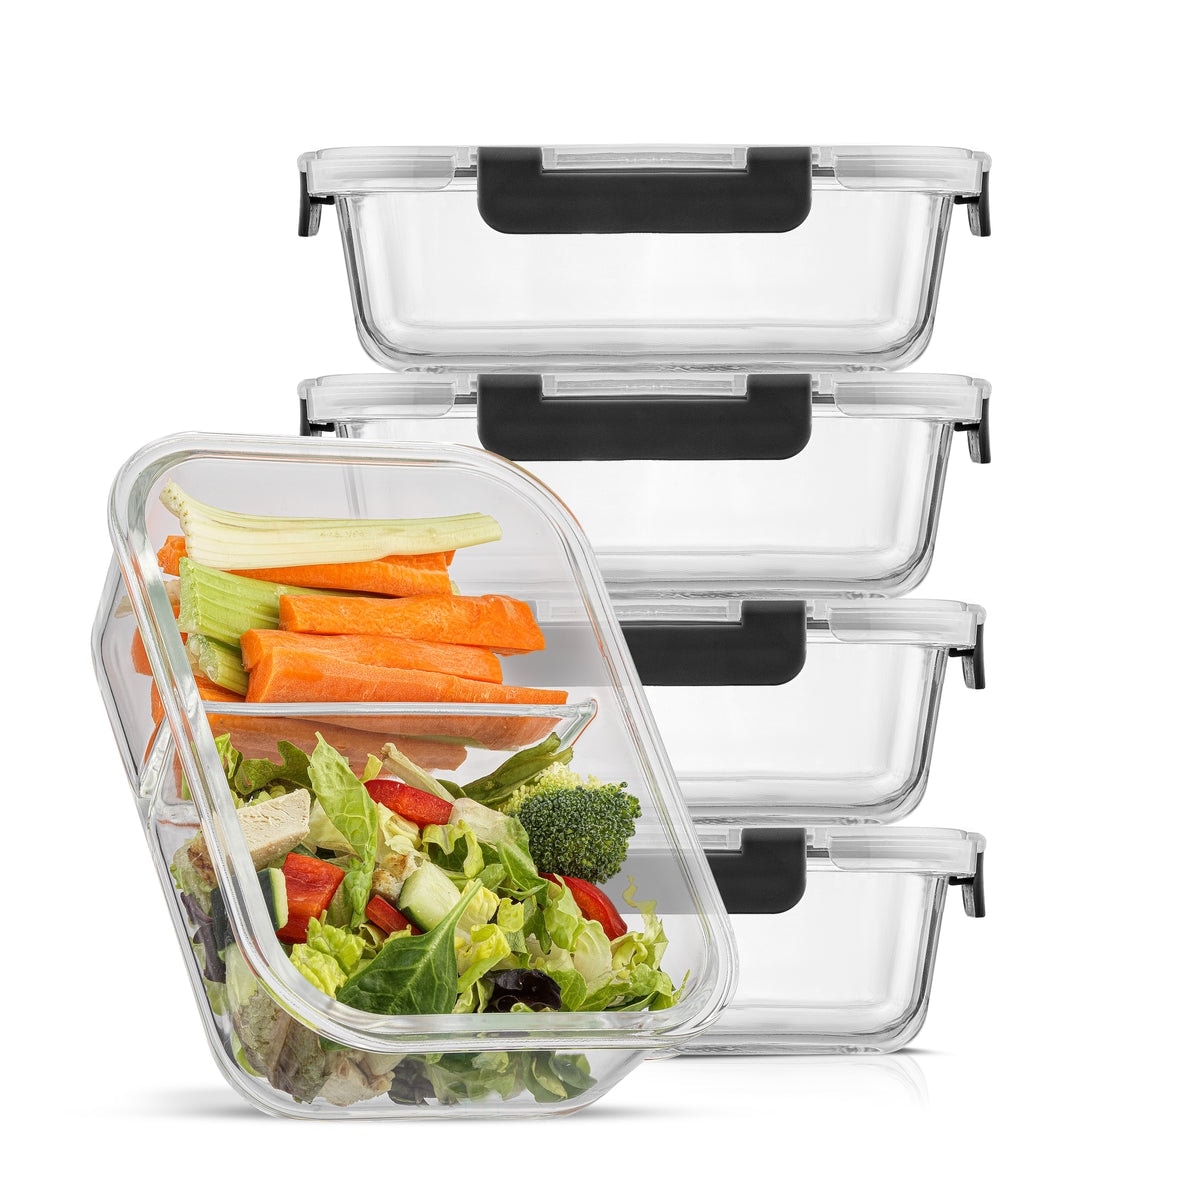 JoyJolt 2-Sectional Food Prep Storage Containers - Set of 5